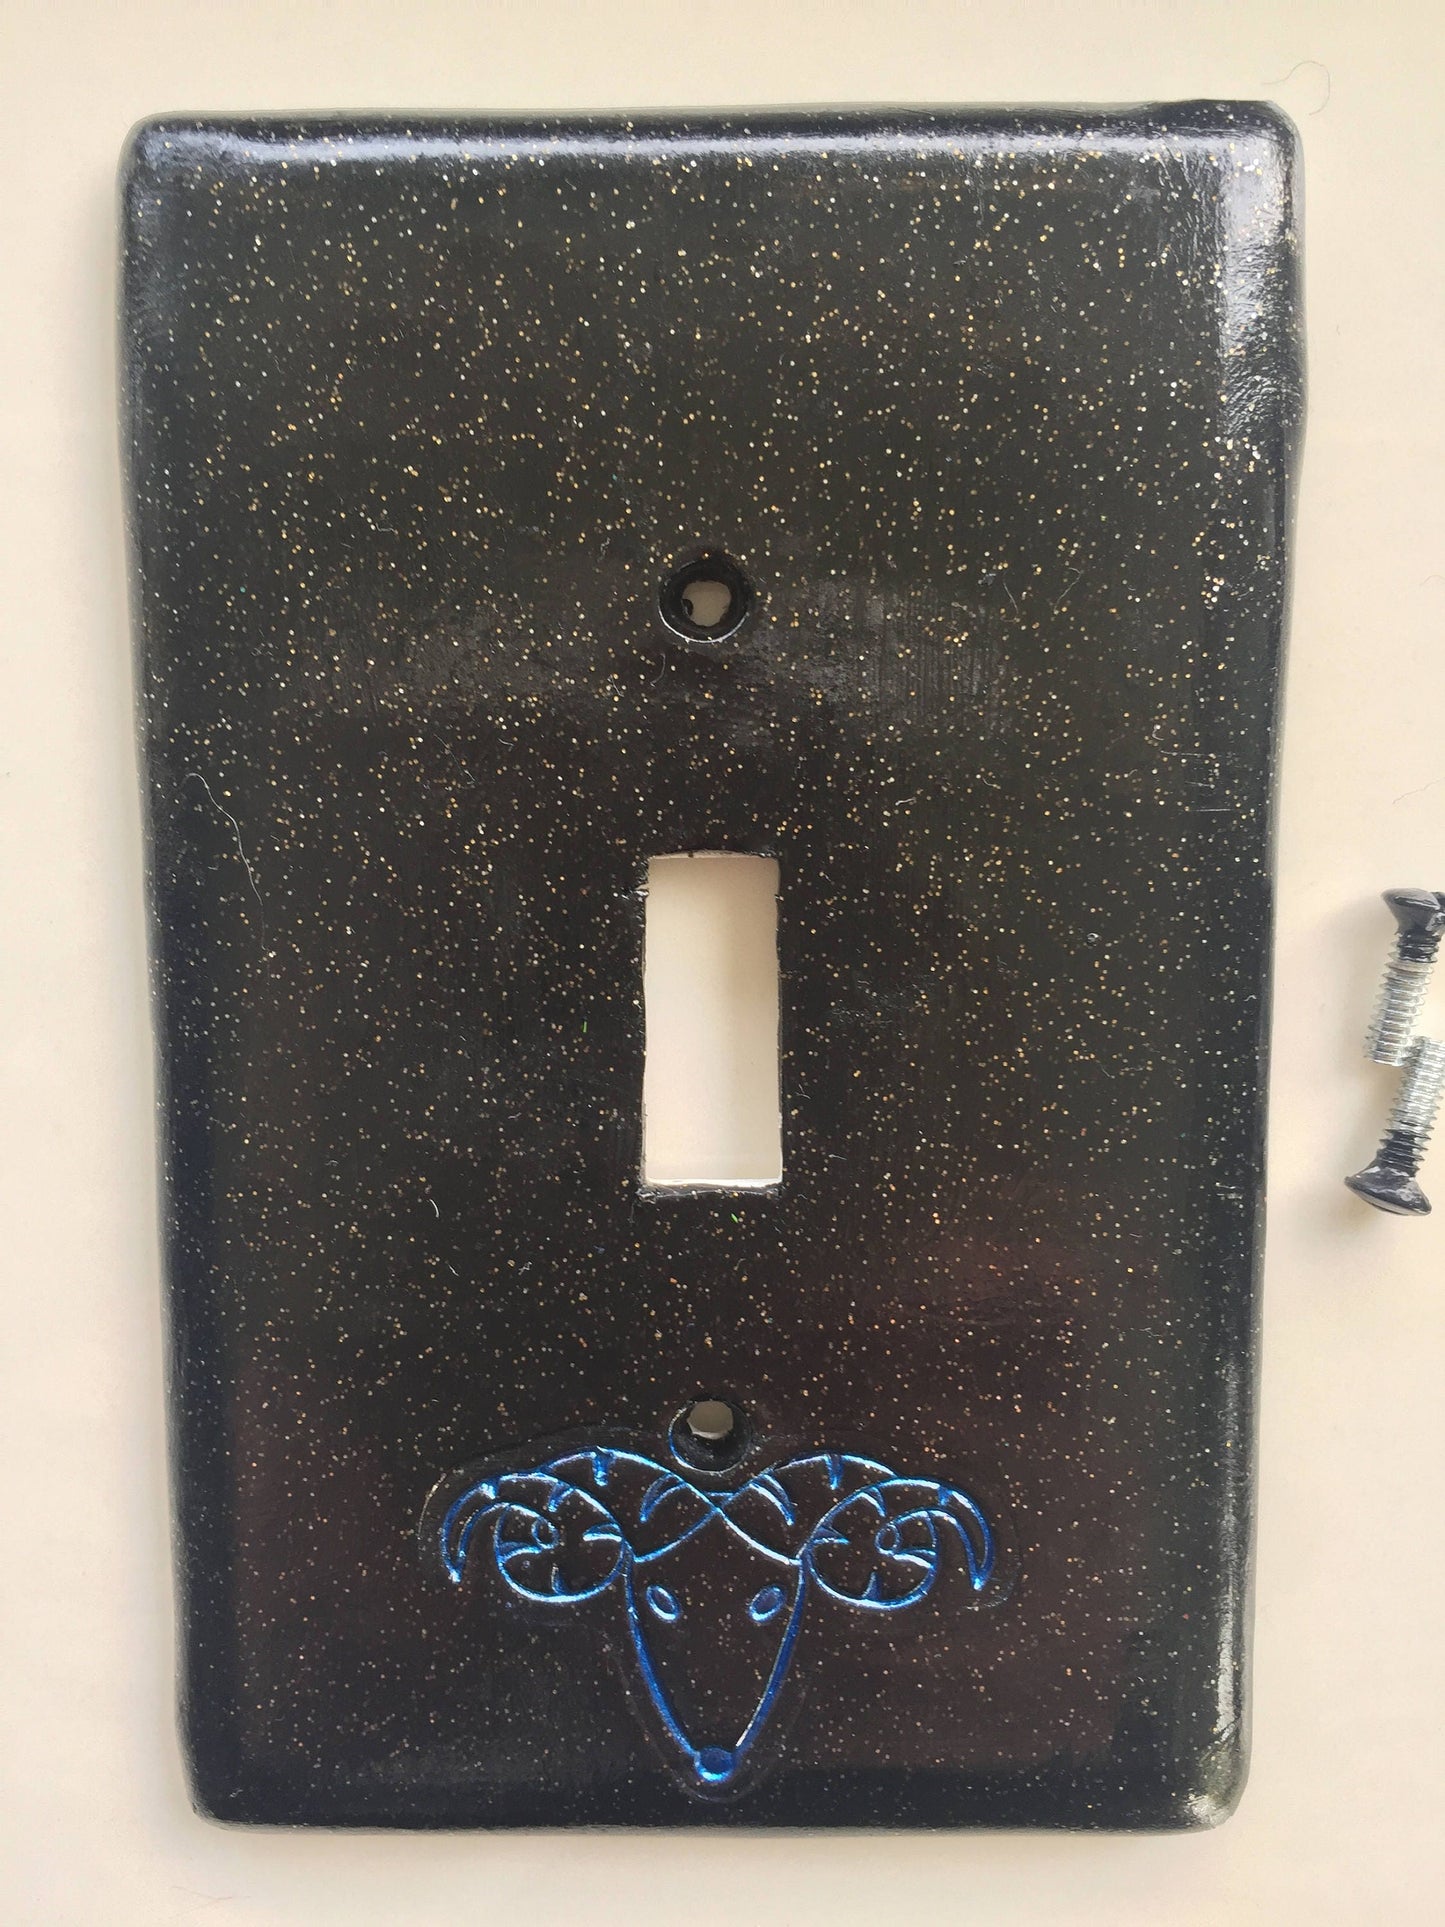 Aries the Ram light switch plate cover for single toggle switch plate cover, black glitter metallic blue custom colors available